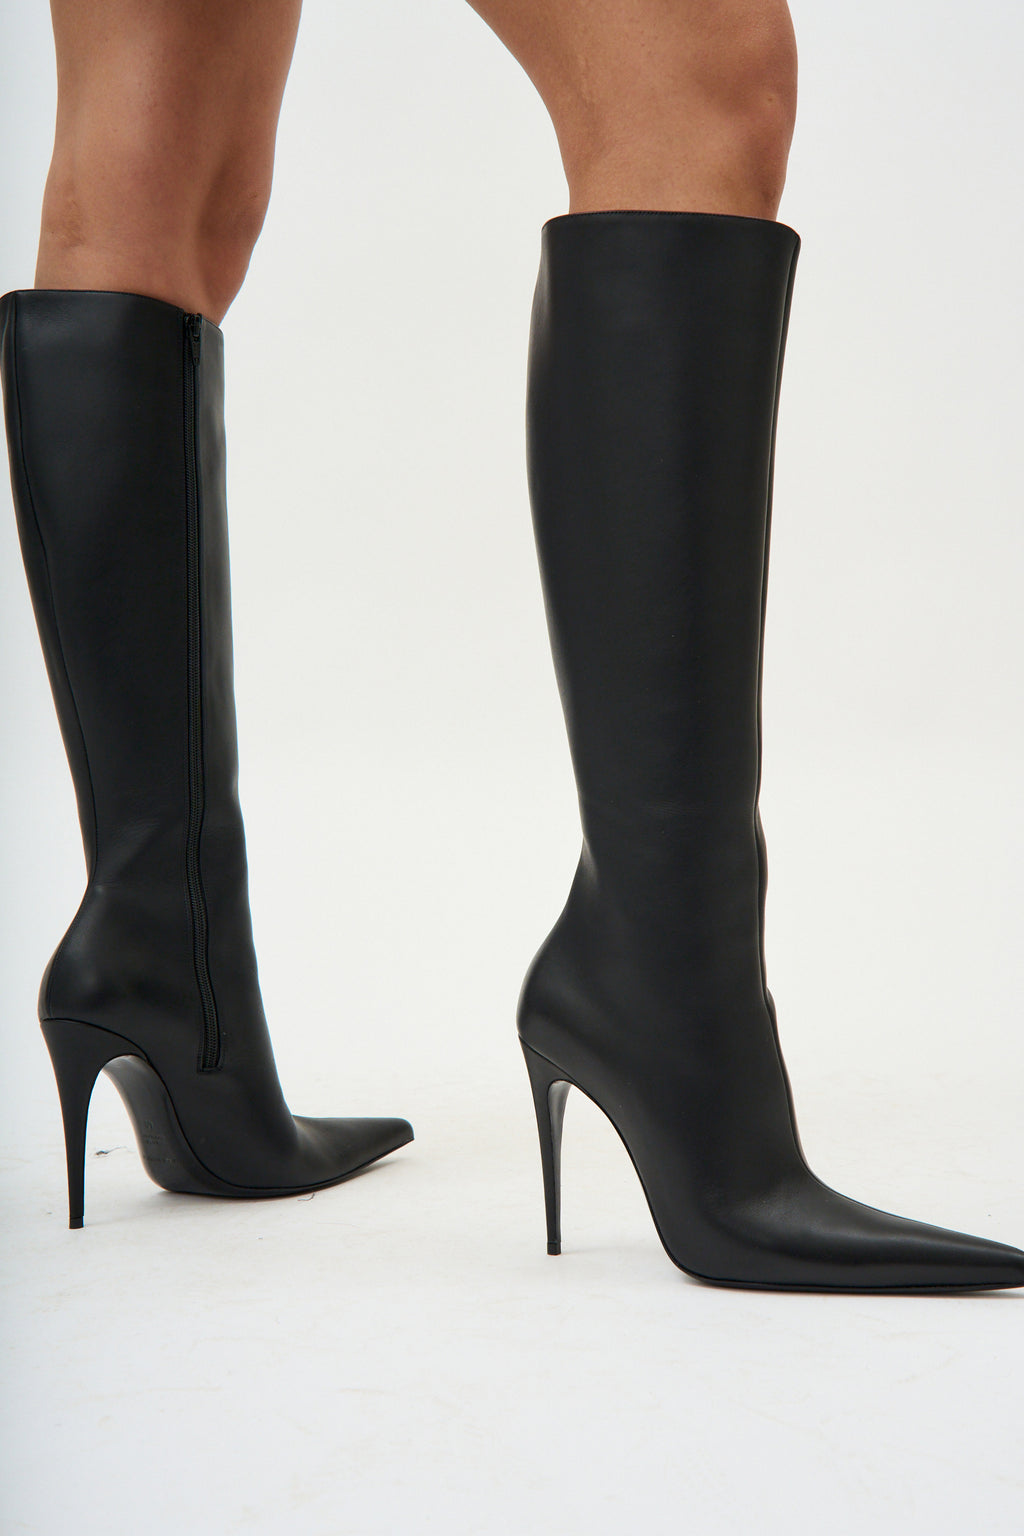 Pointed Toe Black Leather Calf Boots